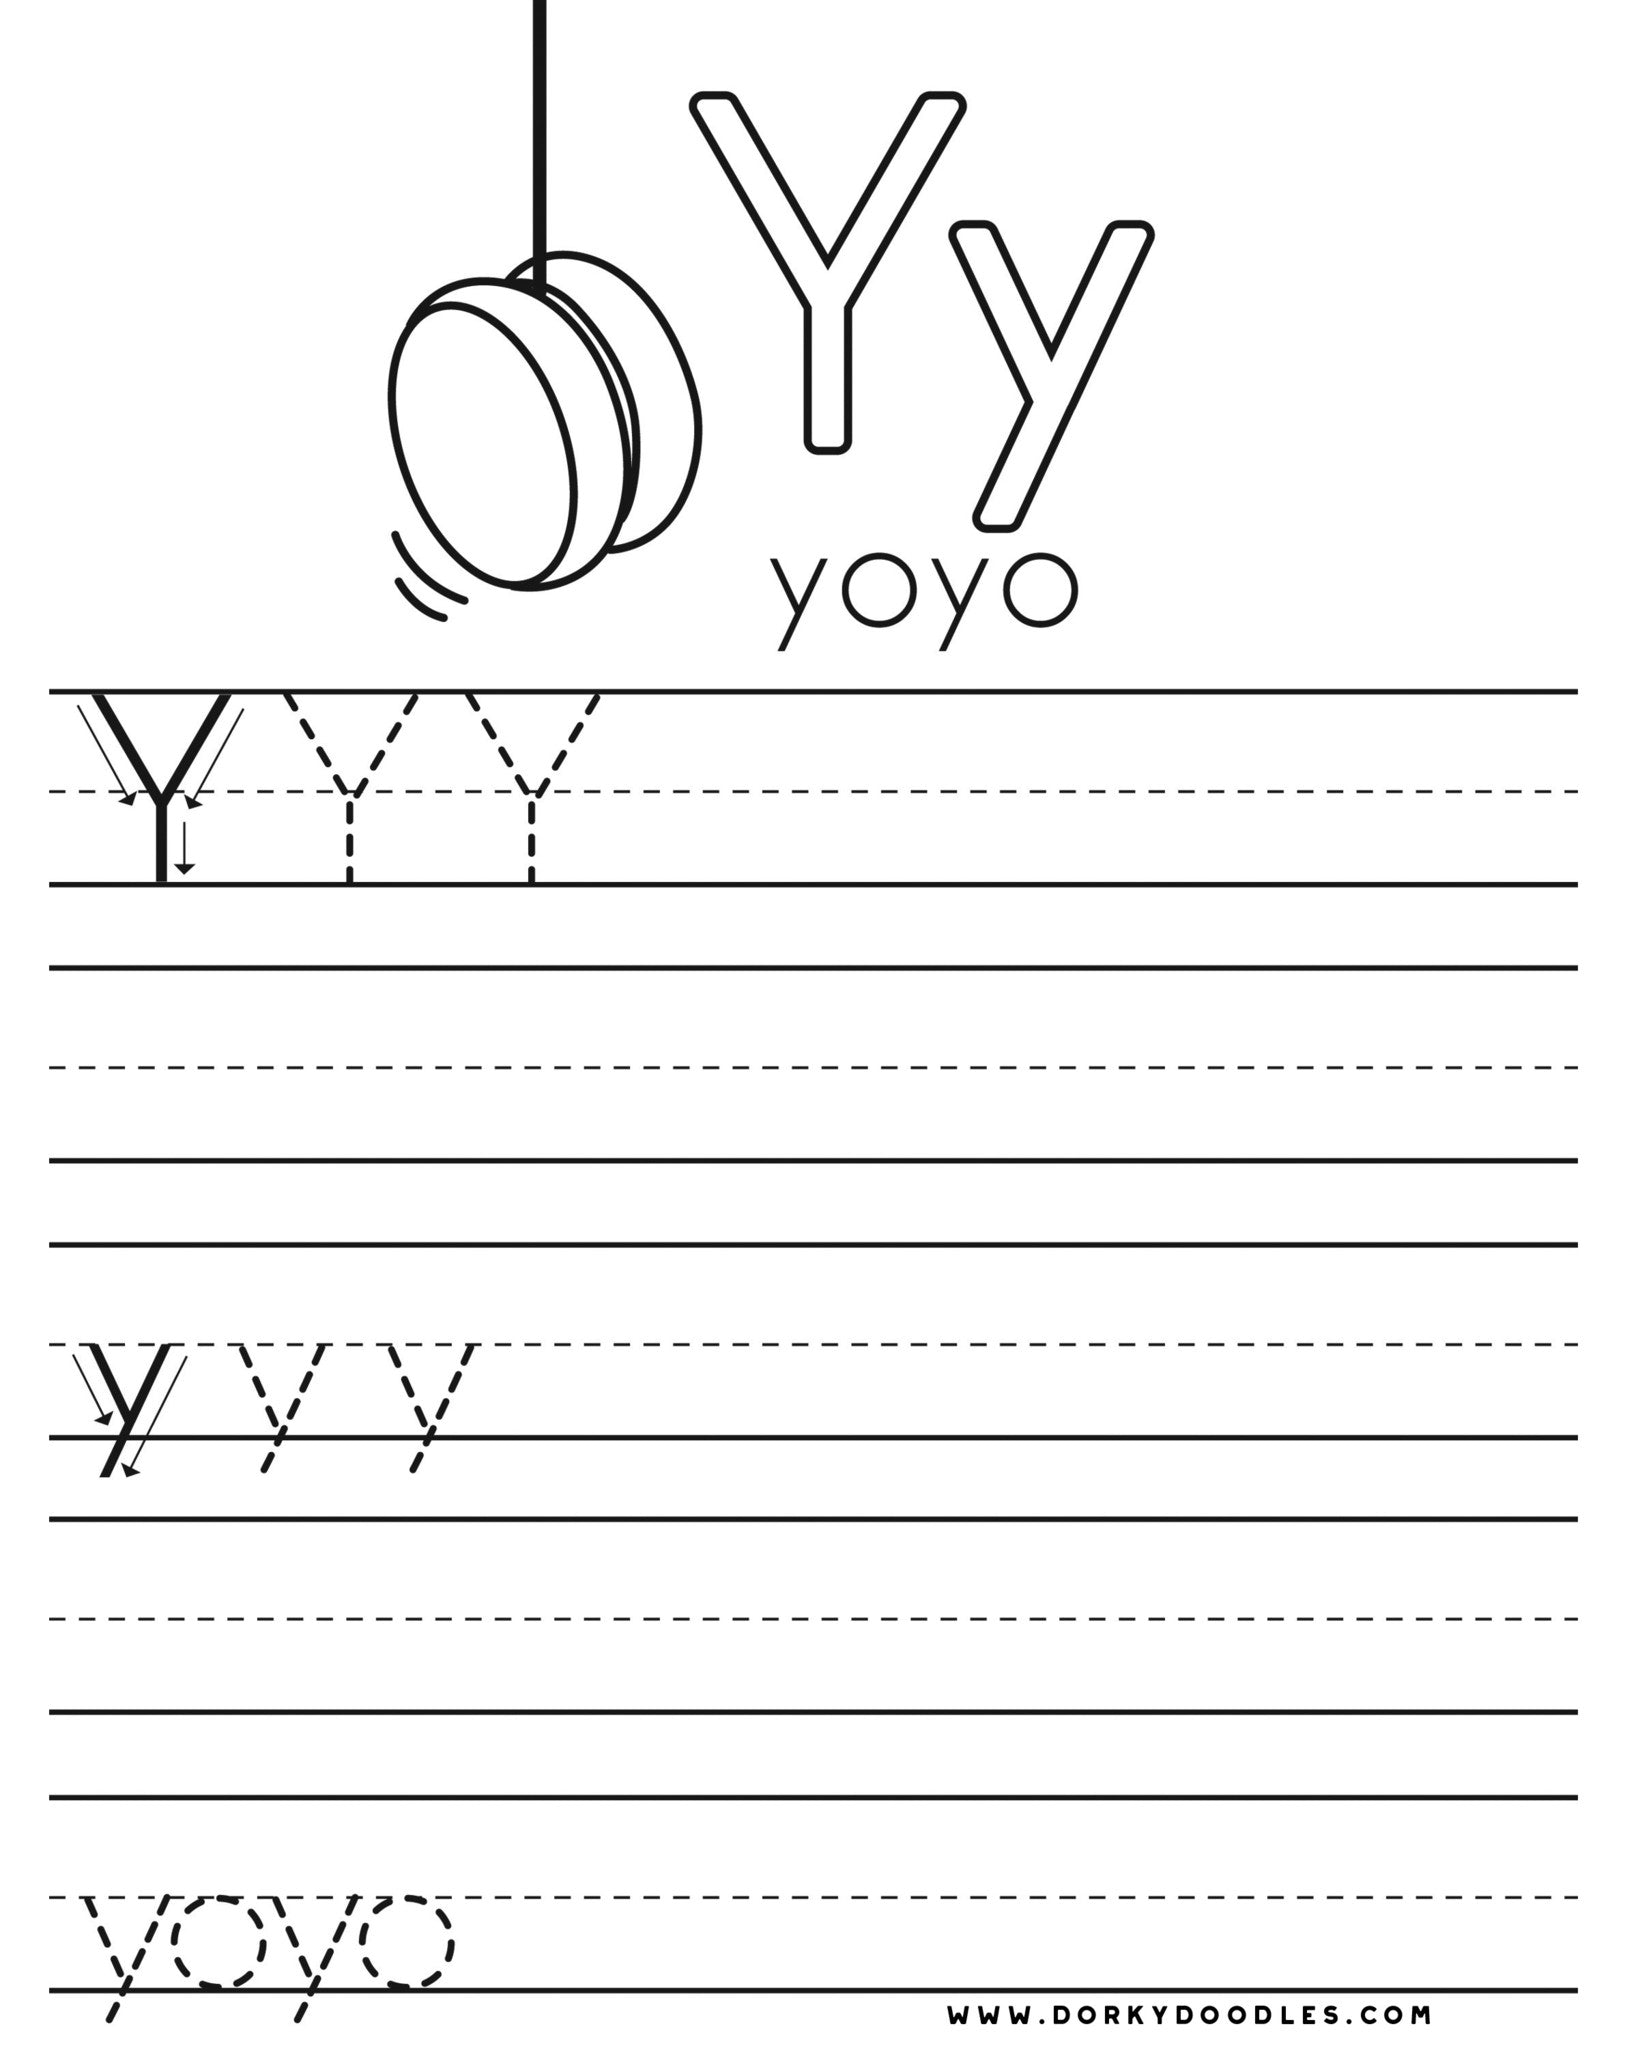 Letter y writing practice and coloring page printables â dorky doodles